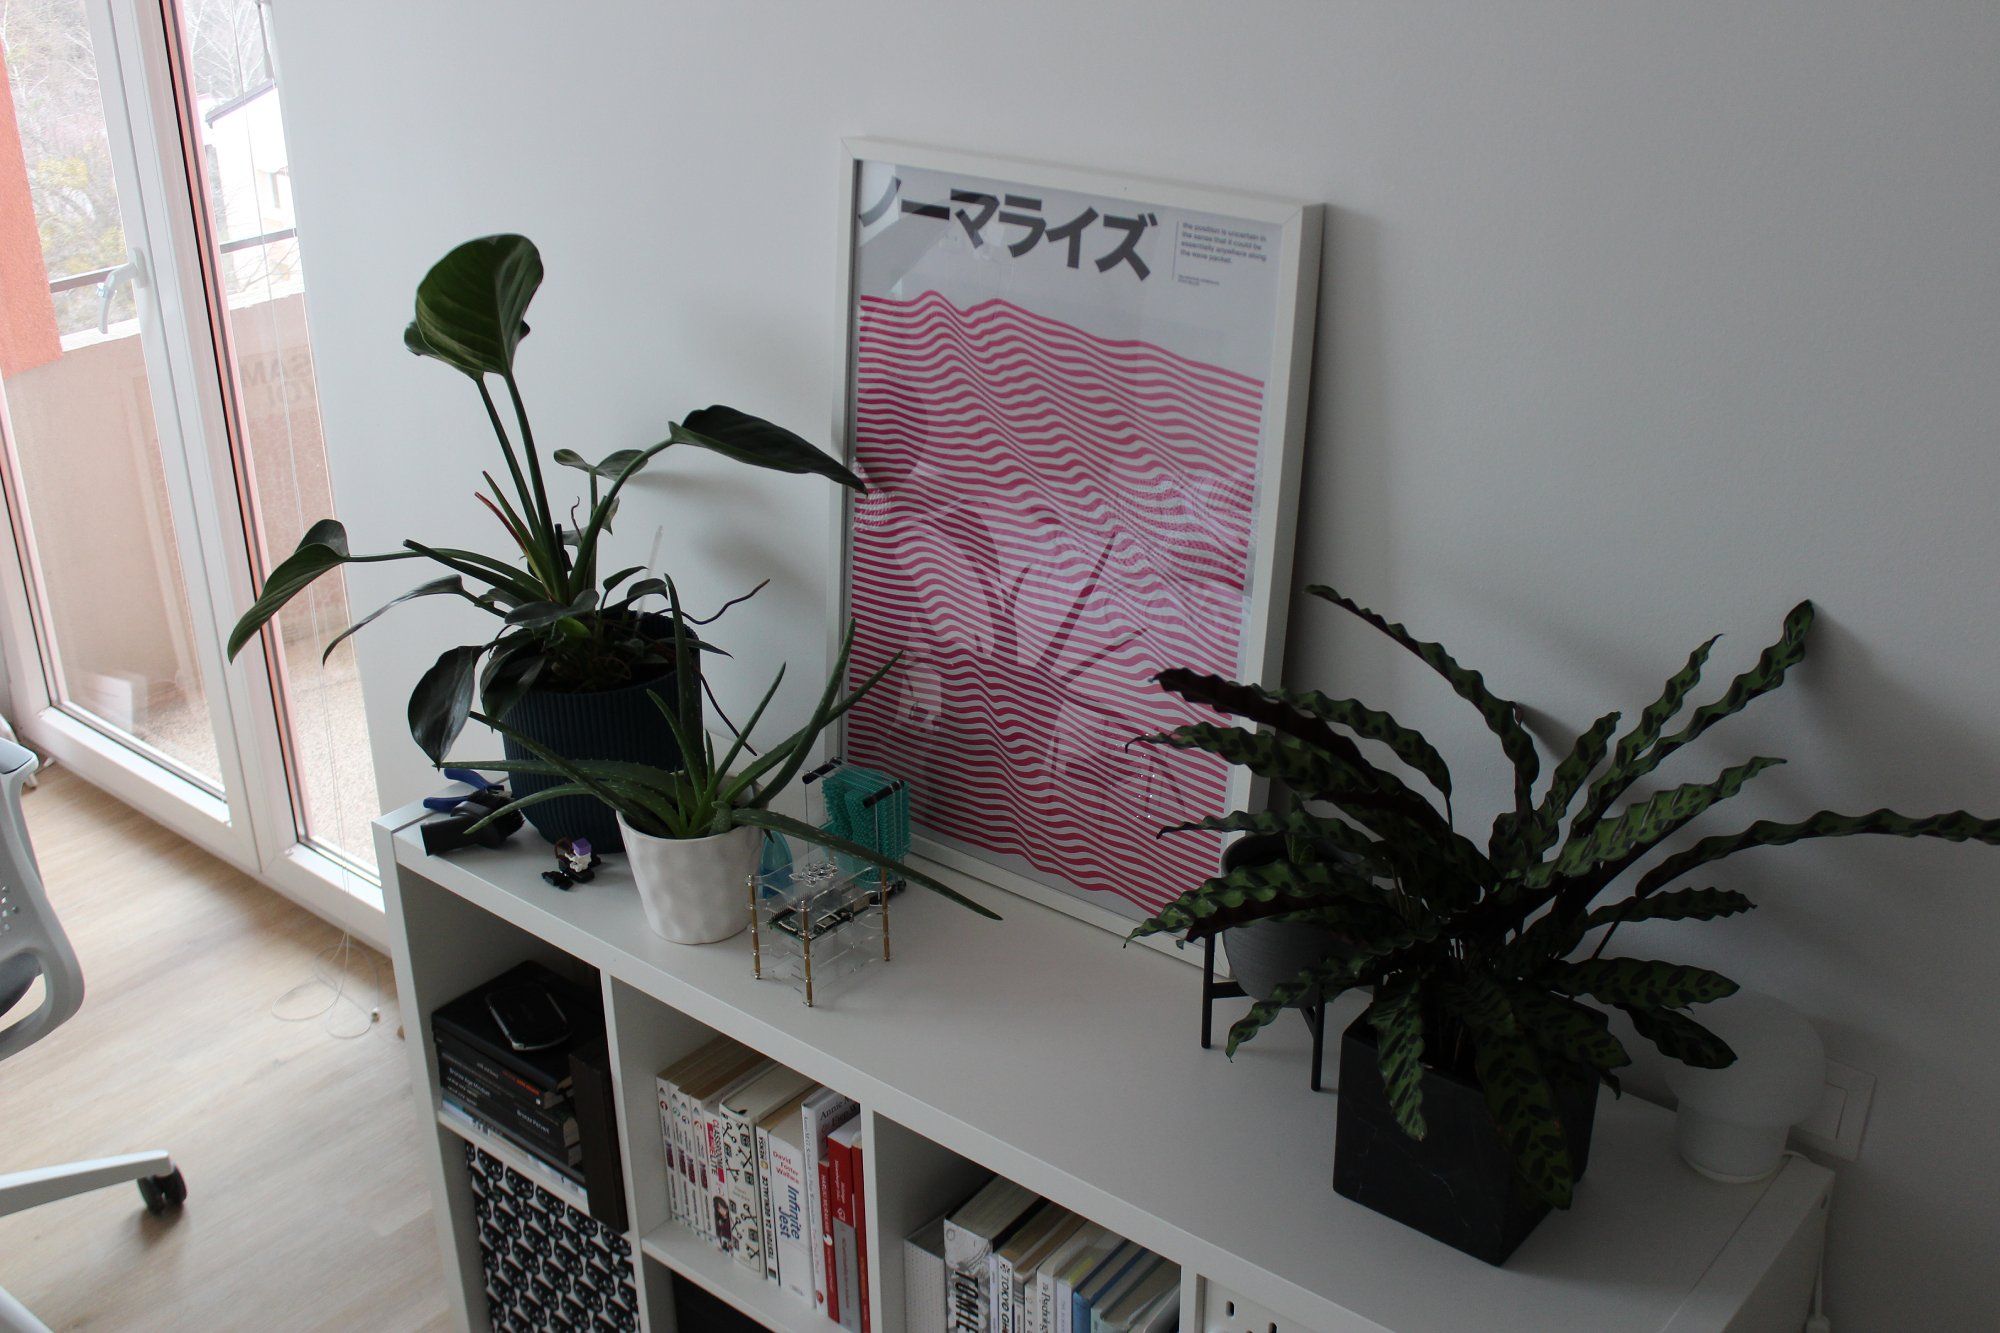 A bookcase with many books on the shelves, three pots with plants, and a poster on top